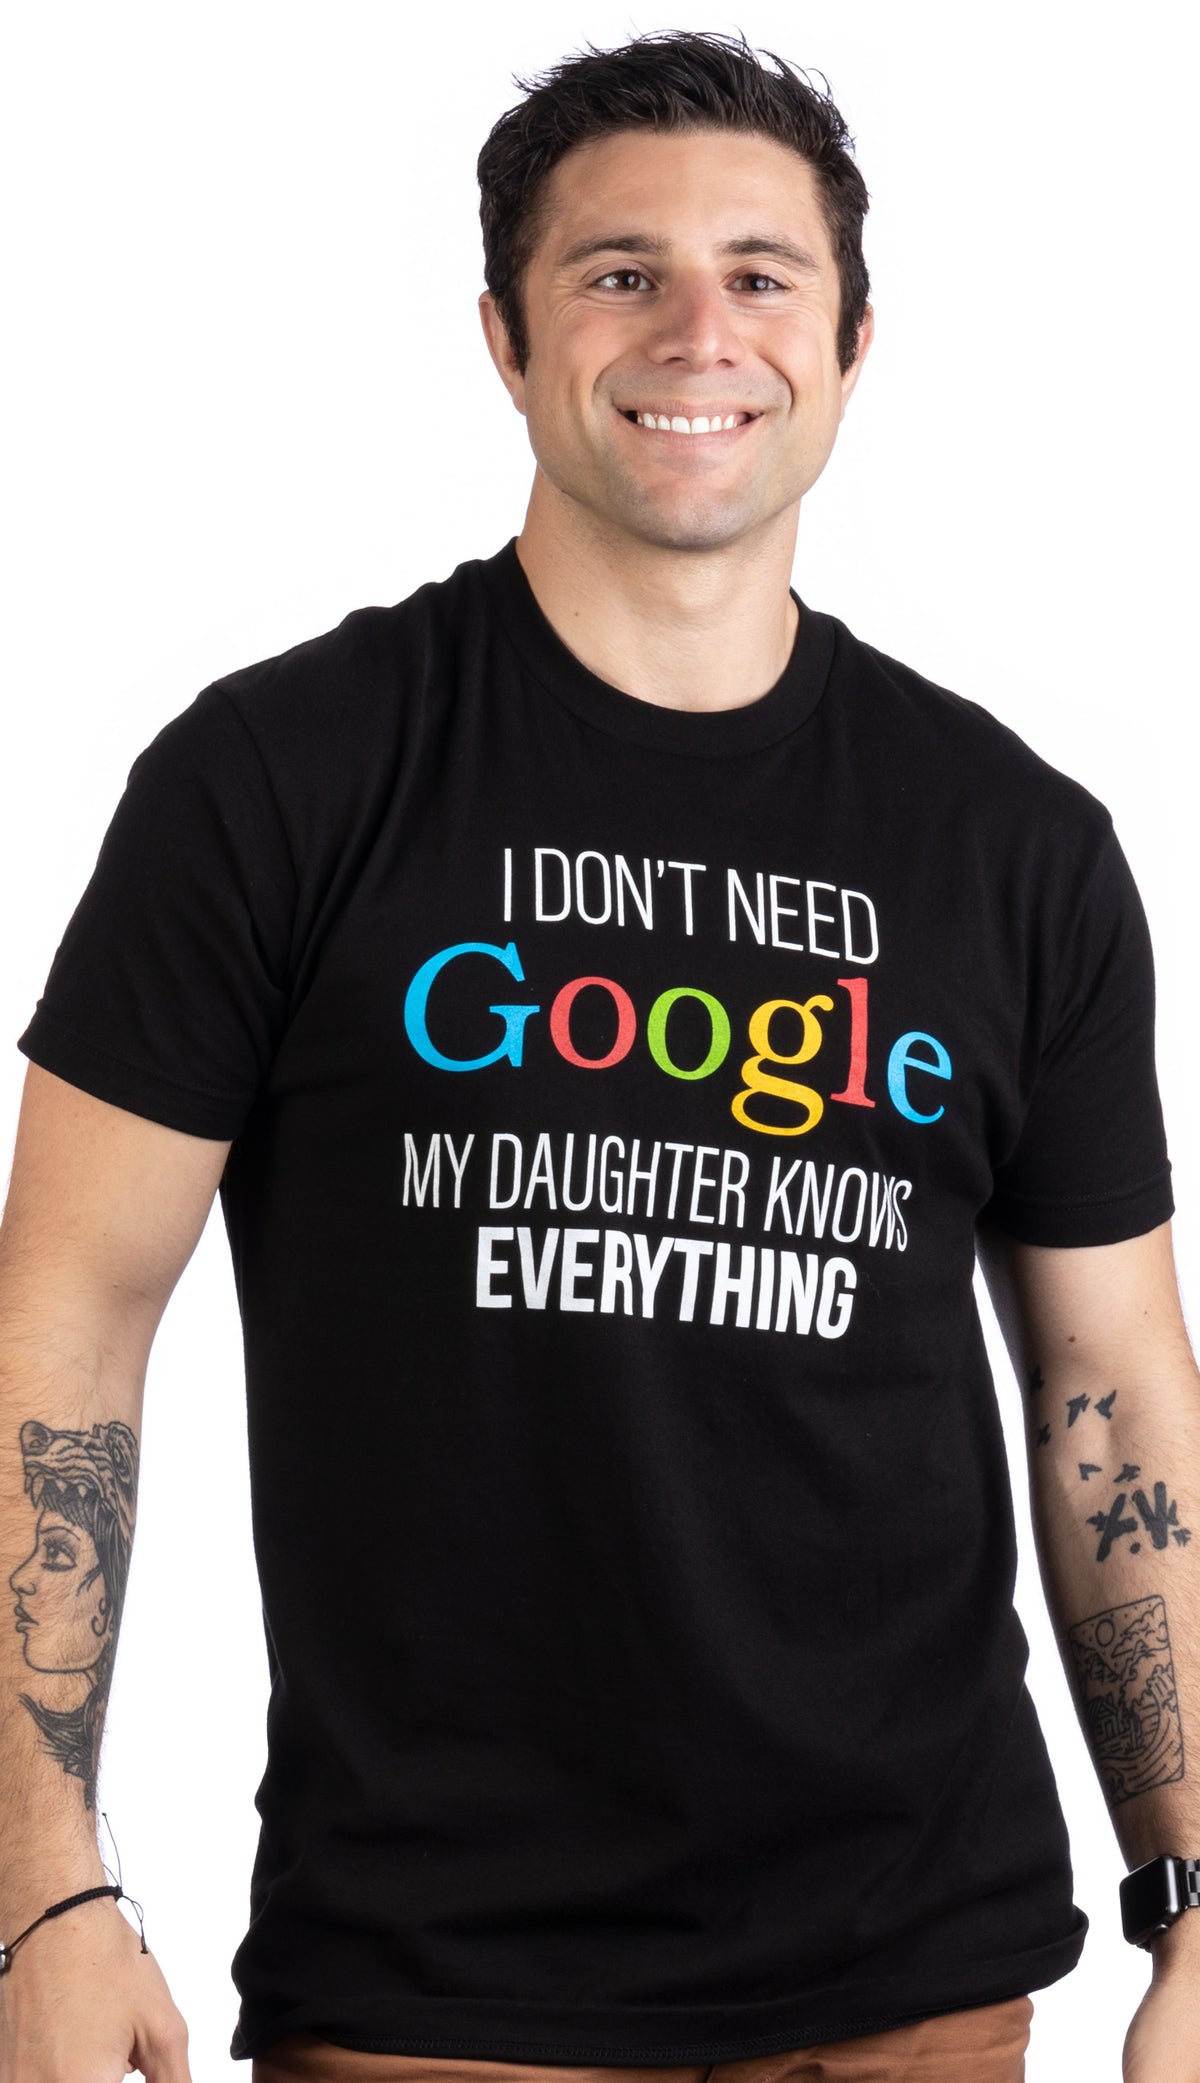 I Don't Need Google, My Daughter Knows Everything - Funny Dad Joke T-shirt